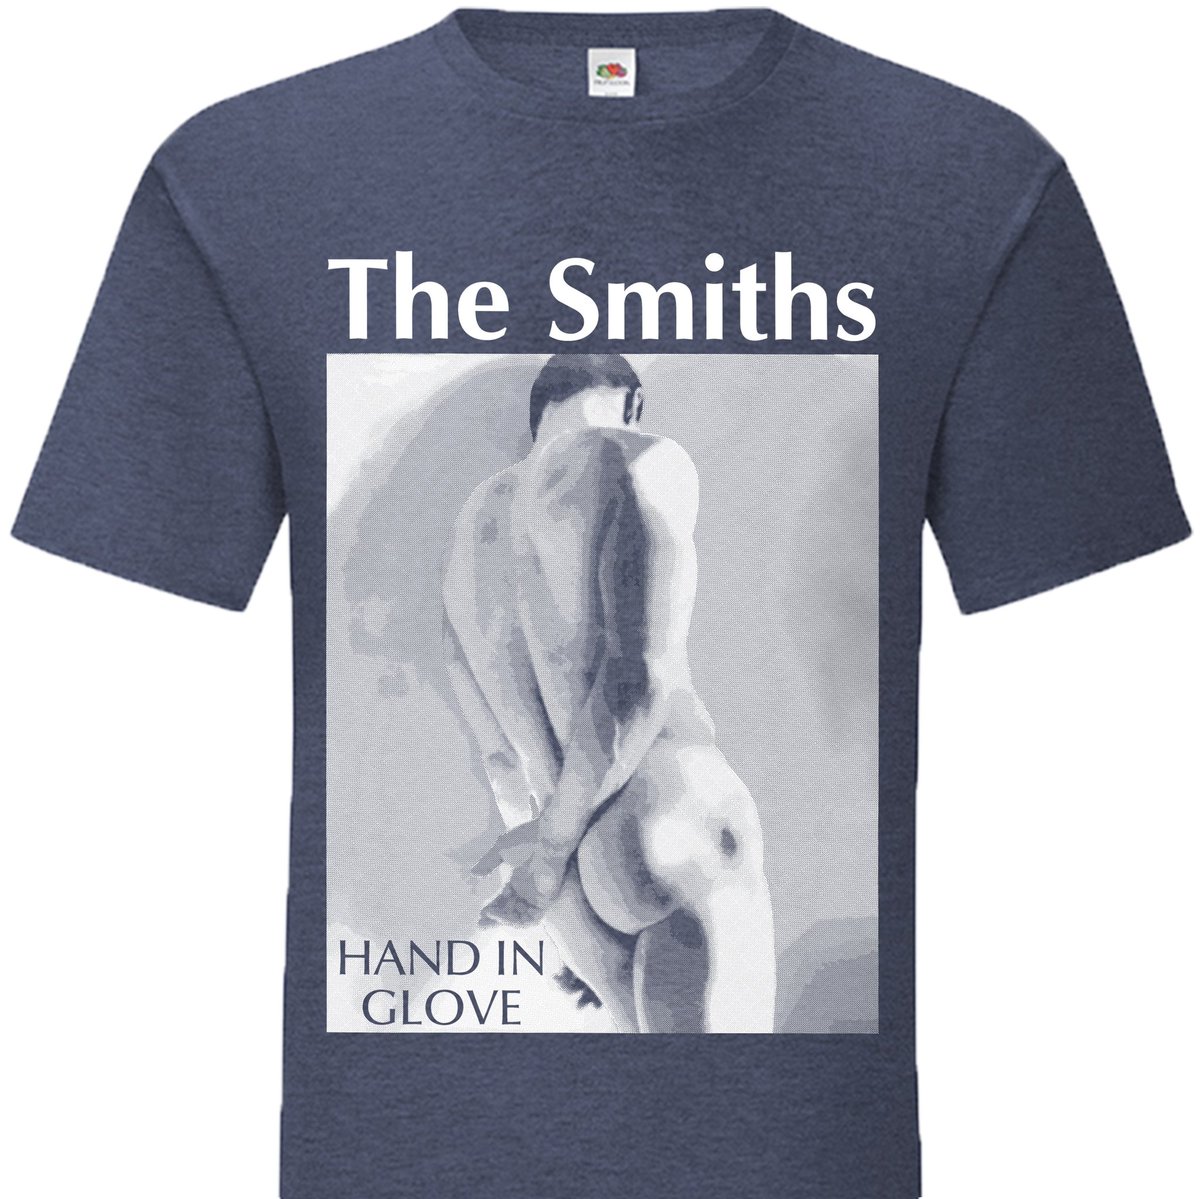 New T-Shirts!
shop.thesmiths.cat/TheSmiths_T-sh…